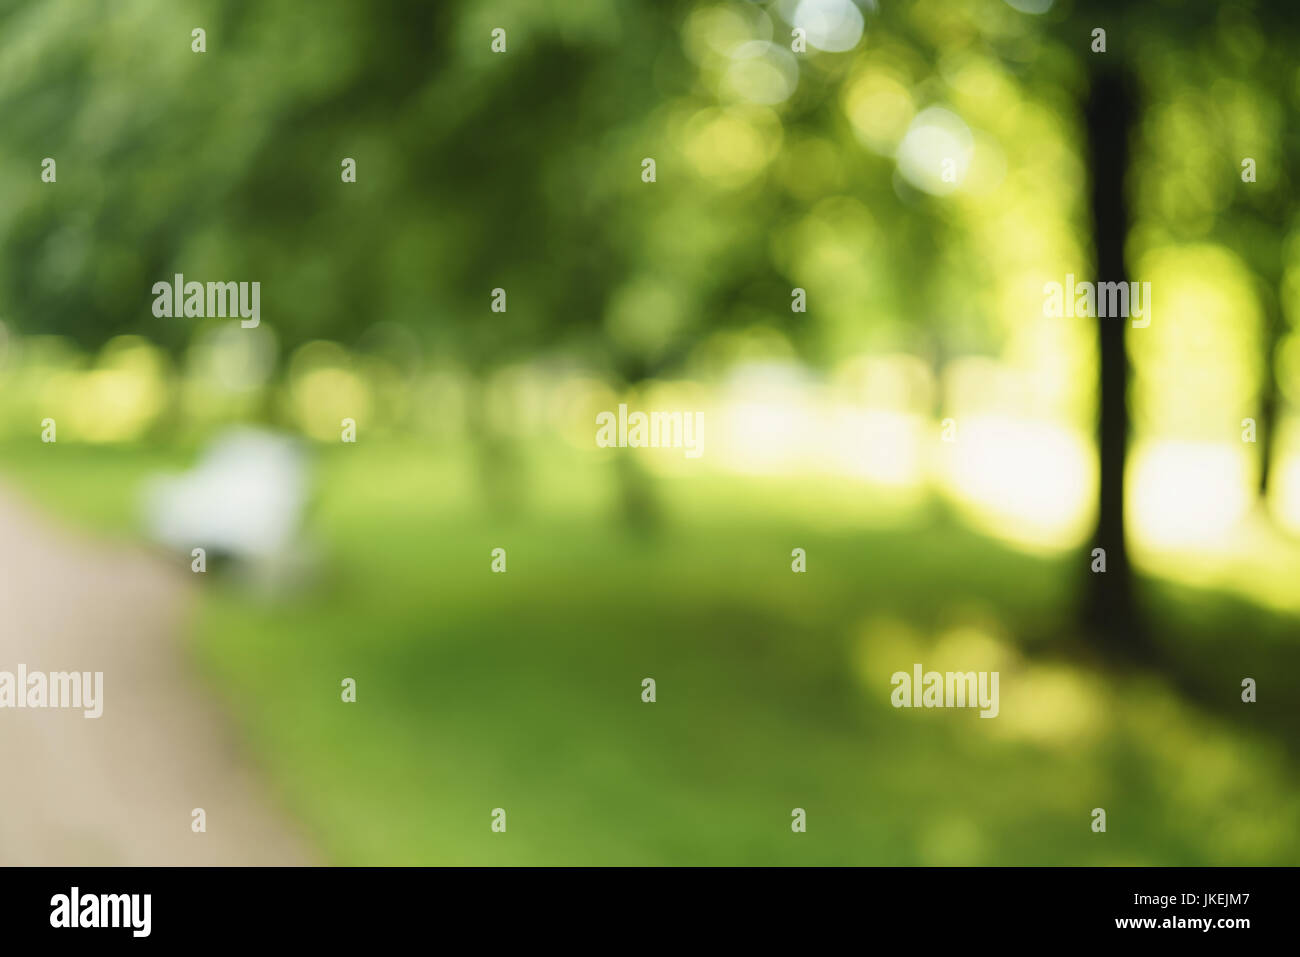 abstract blurred background of city park in sunny summer day Stock Photo